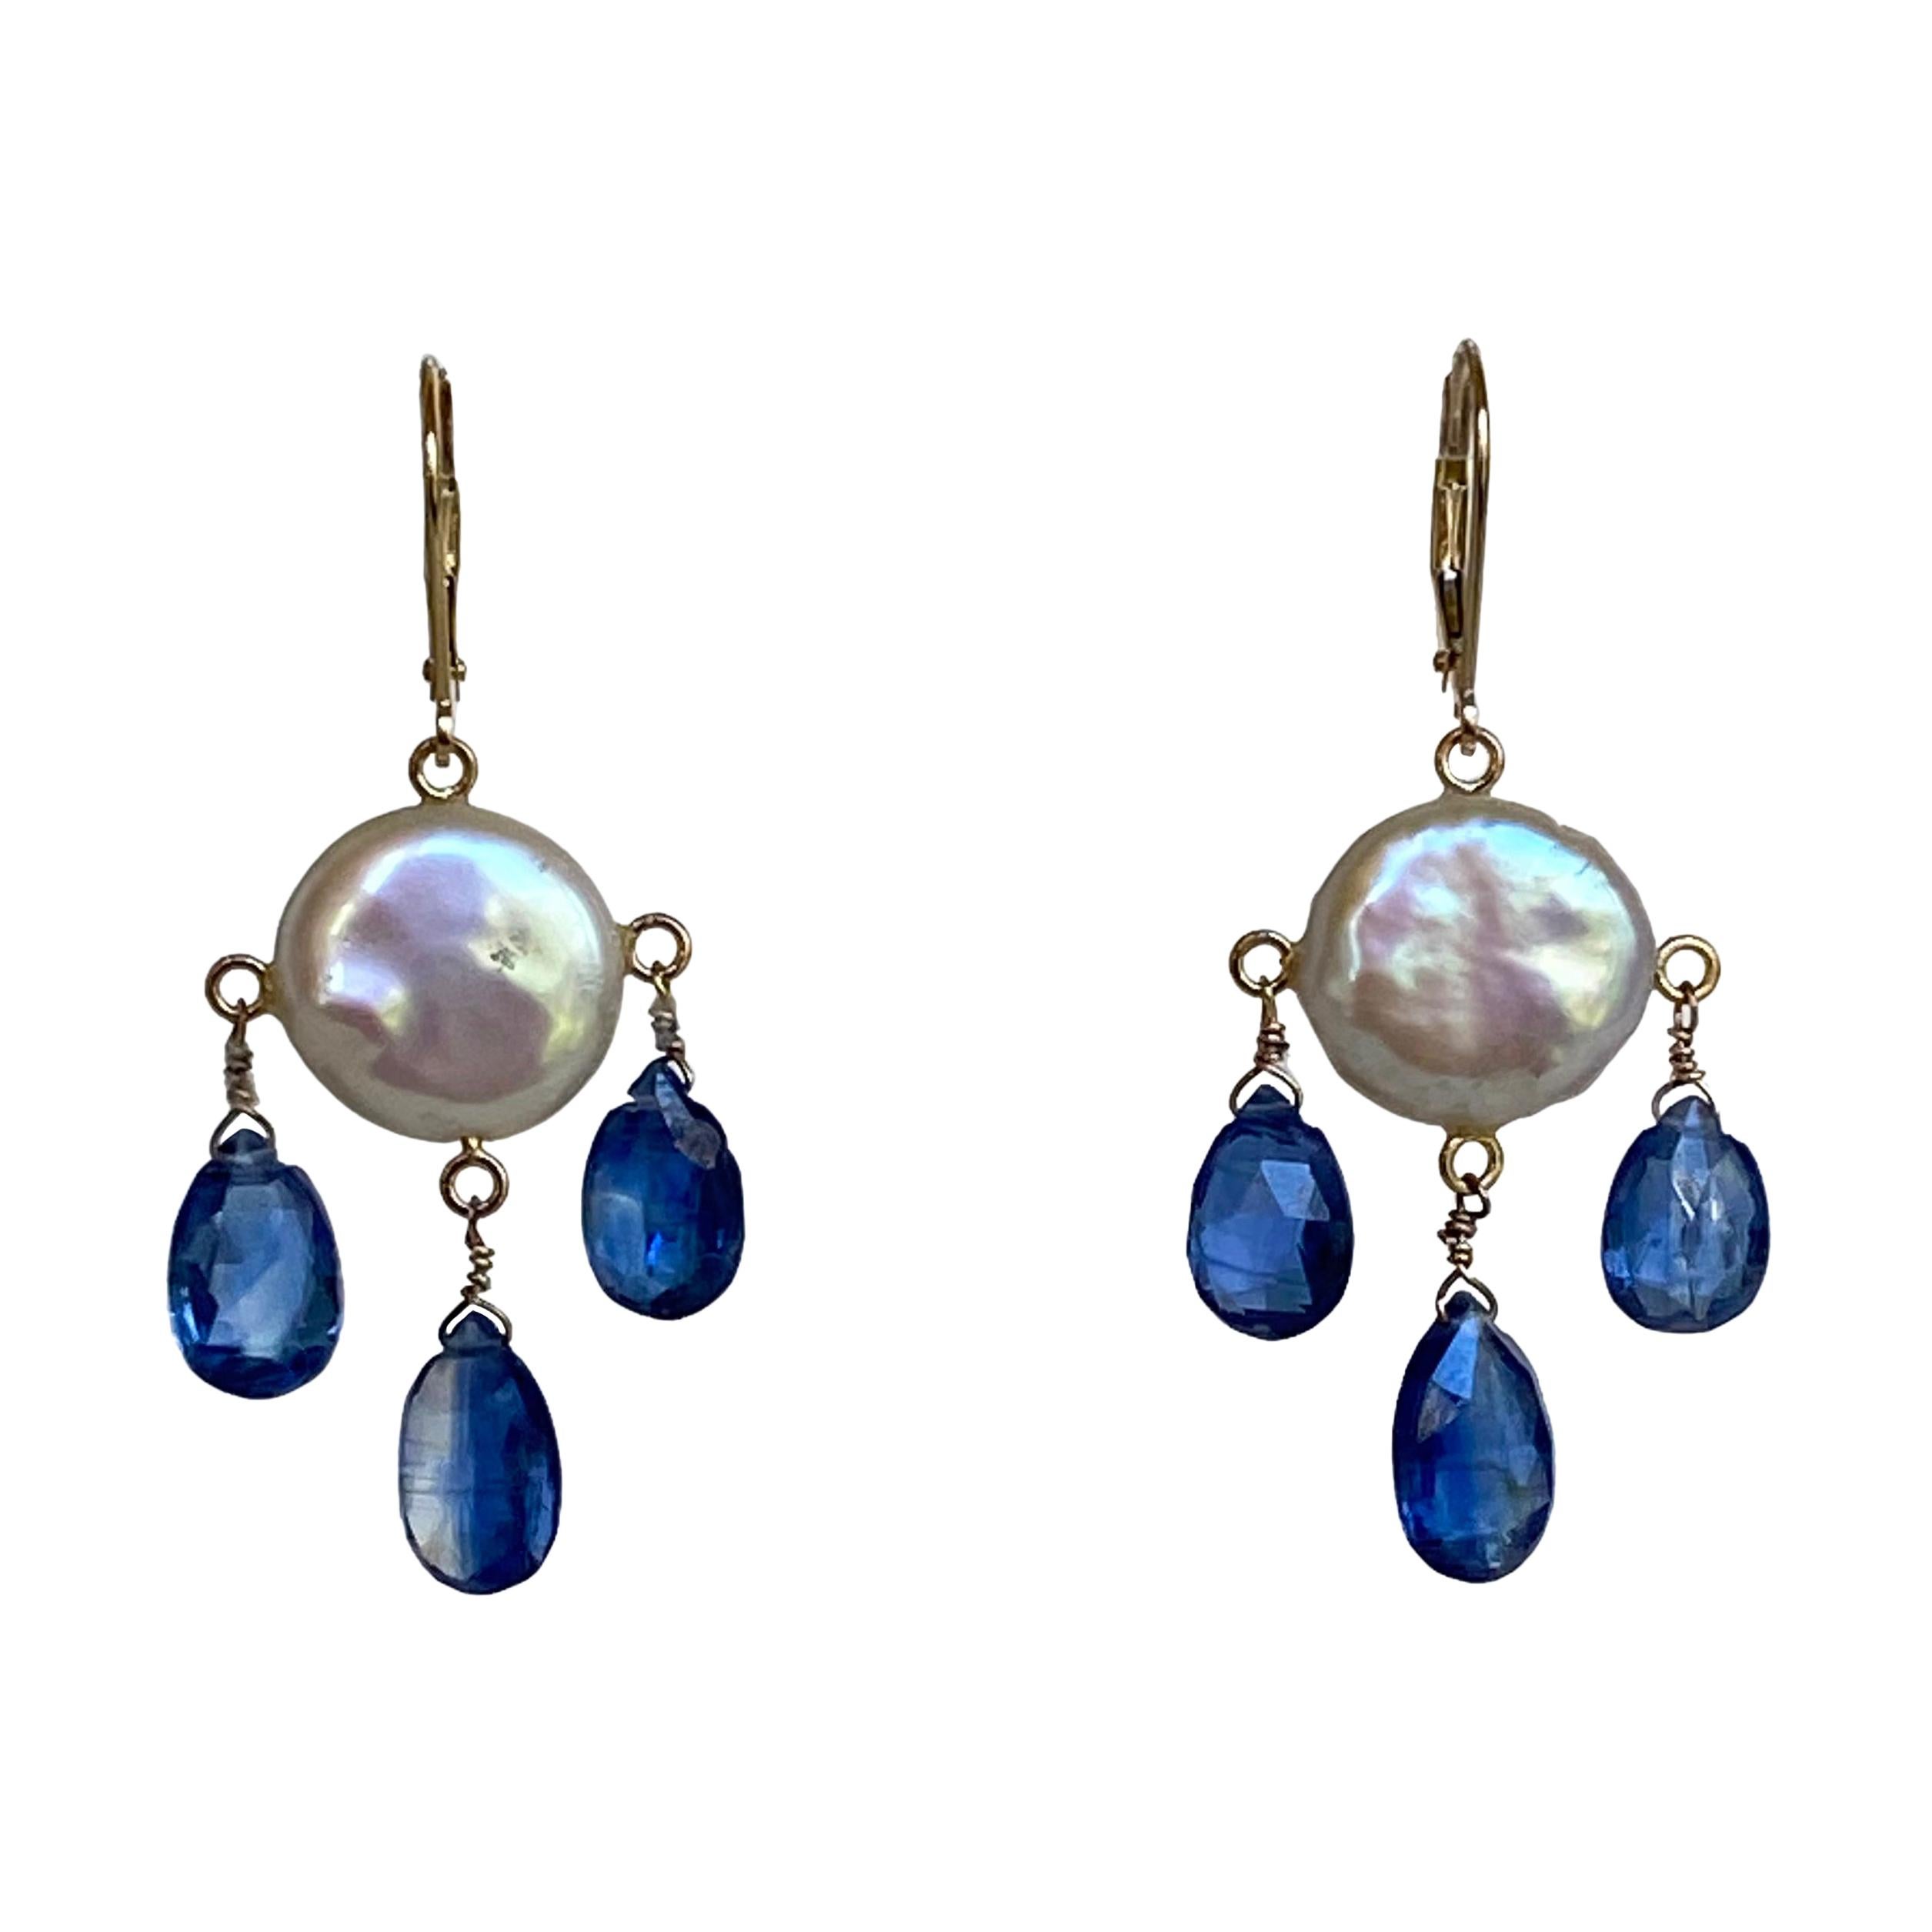 Marina J White Coin Pearl and Kyanite Drop Earrings with 14k Yellow Gold 